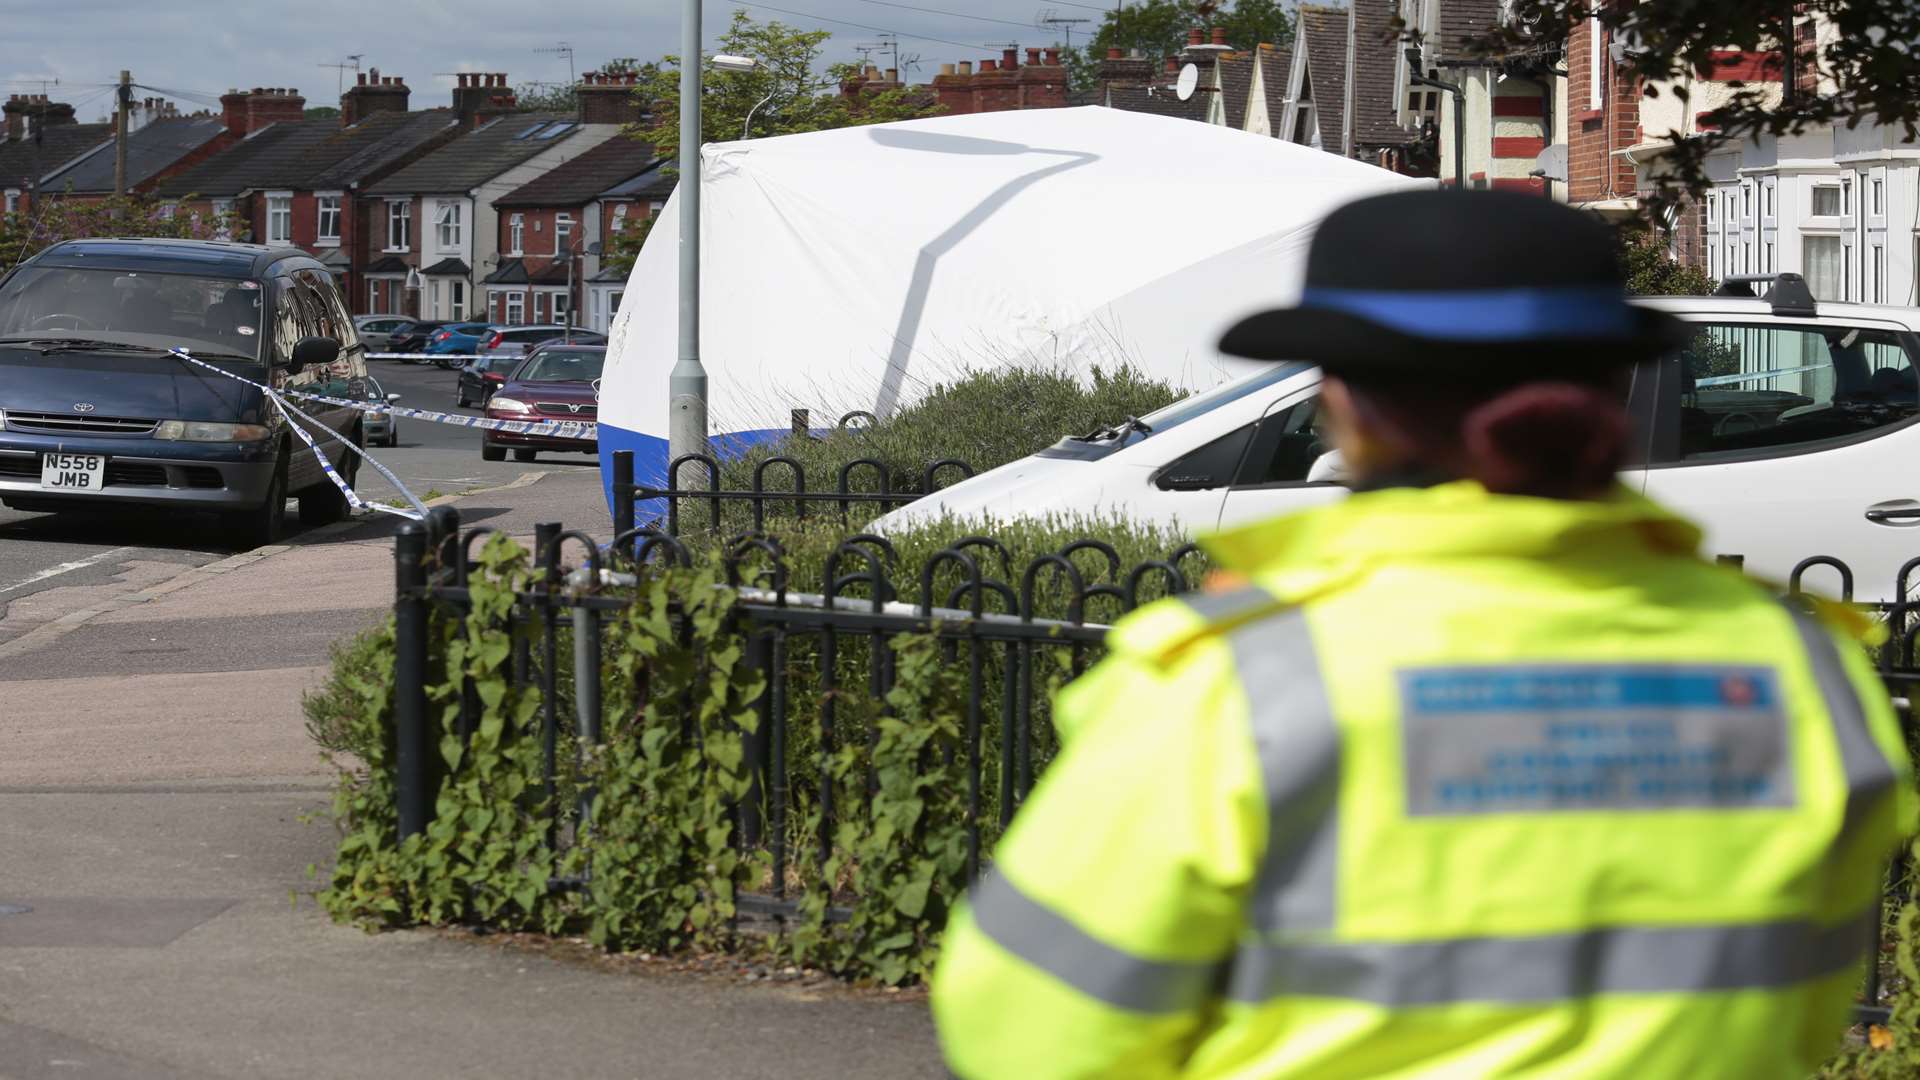 Forensic officers descended on the Murphy's property in Hectorage Road after the incident. Picture: Martin Apps